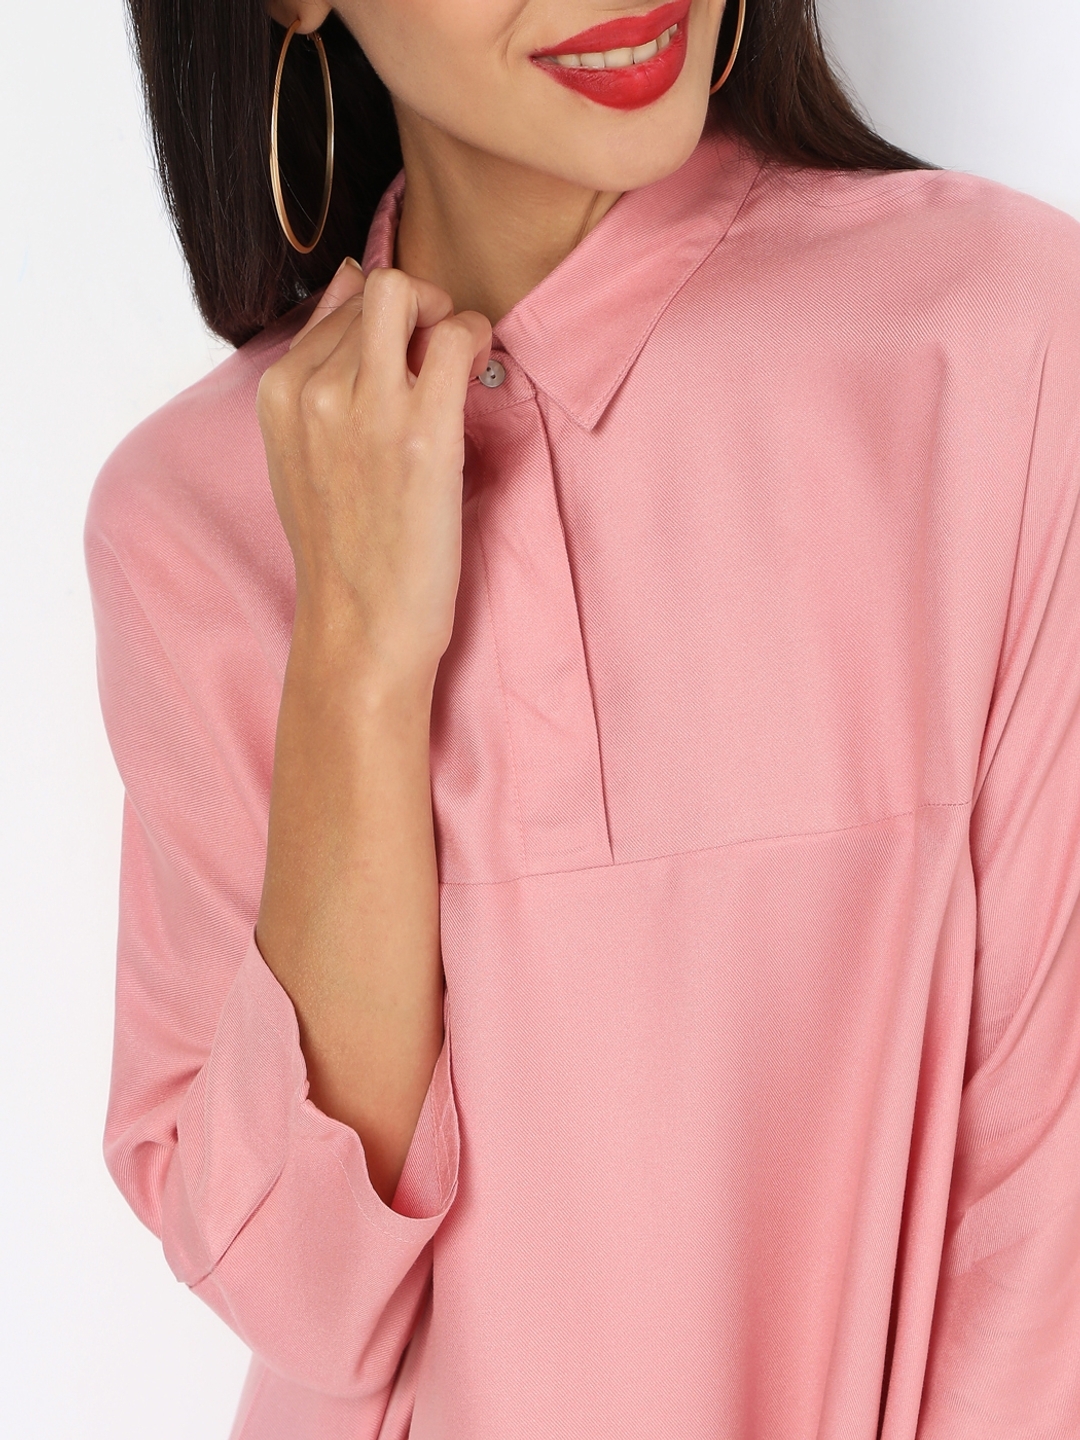 Panelled Shirt with Dipped Hemline